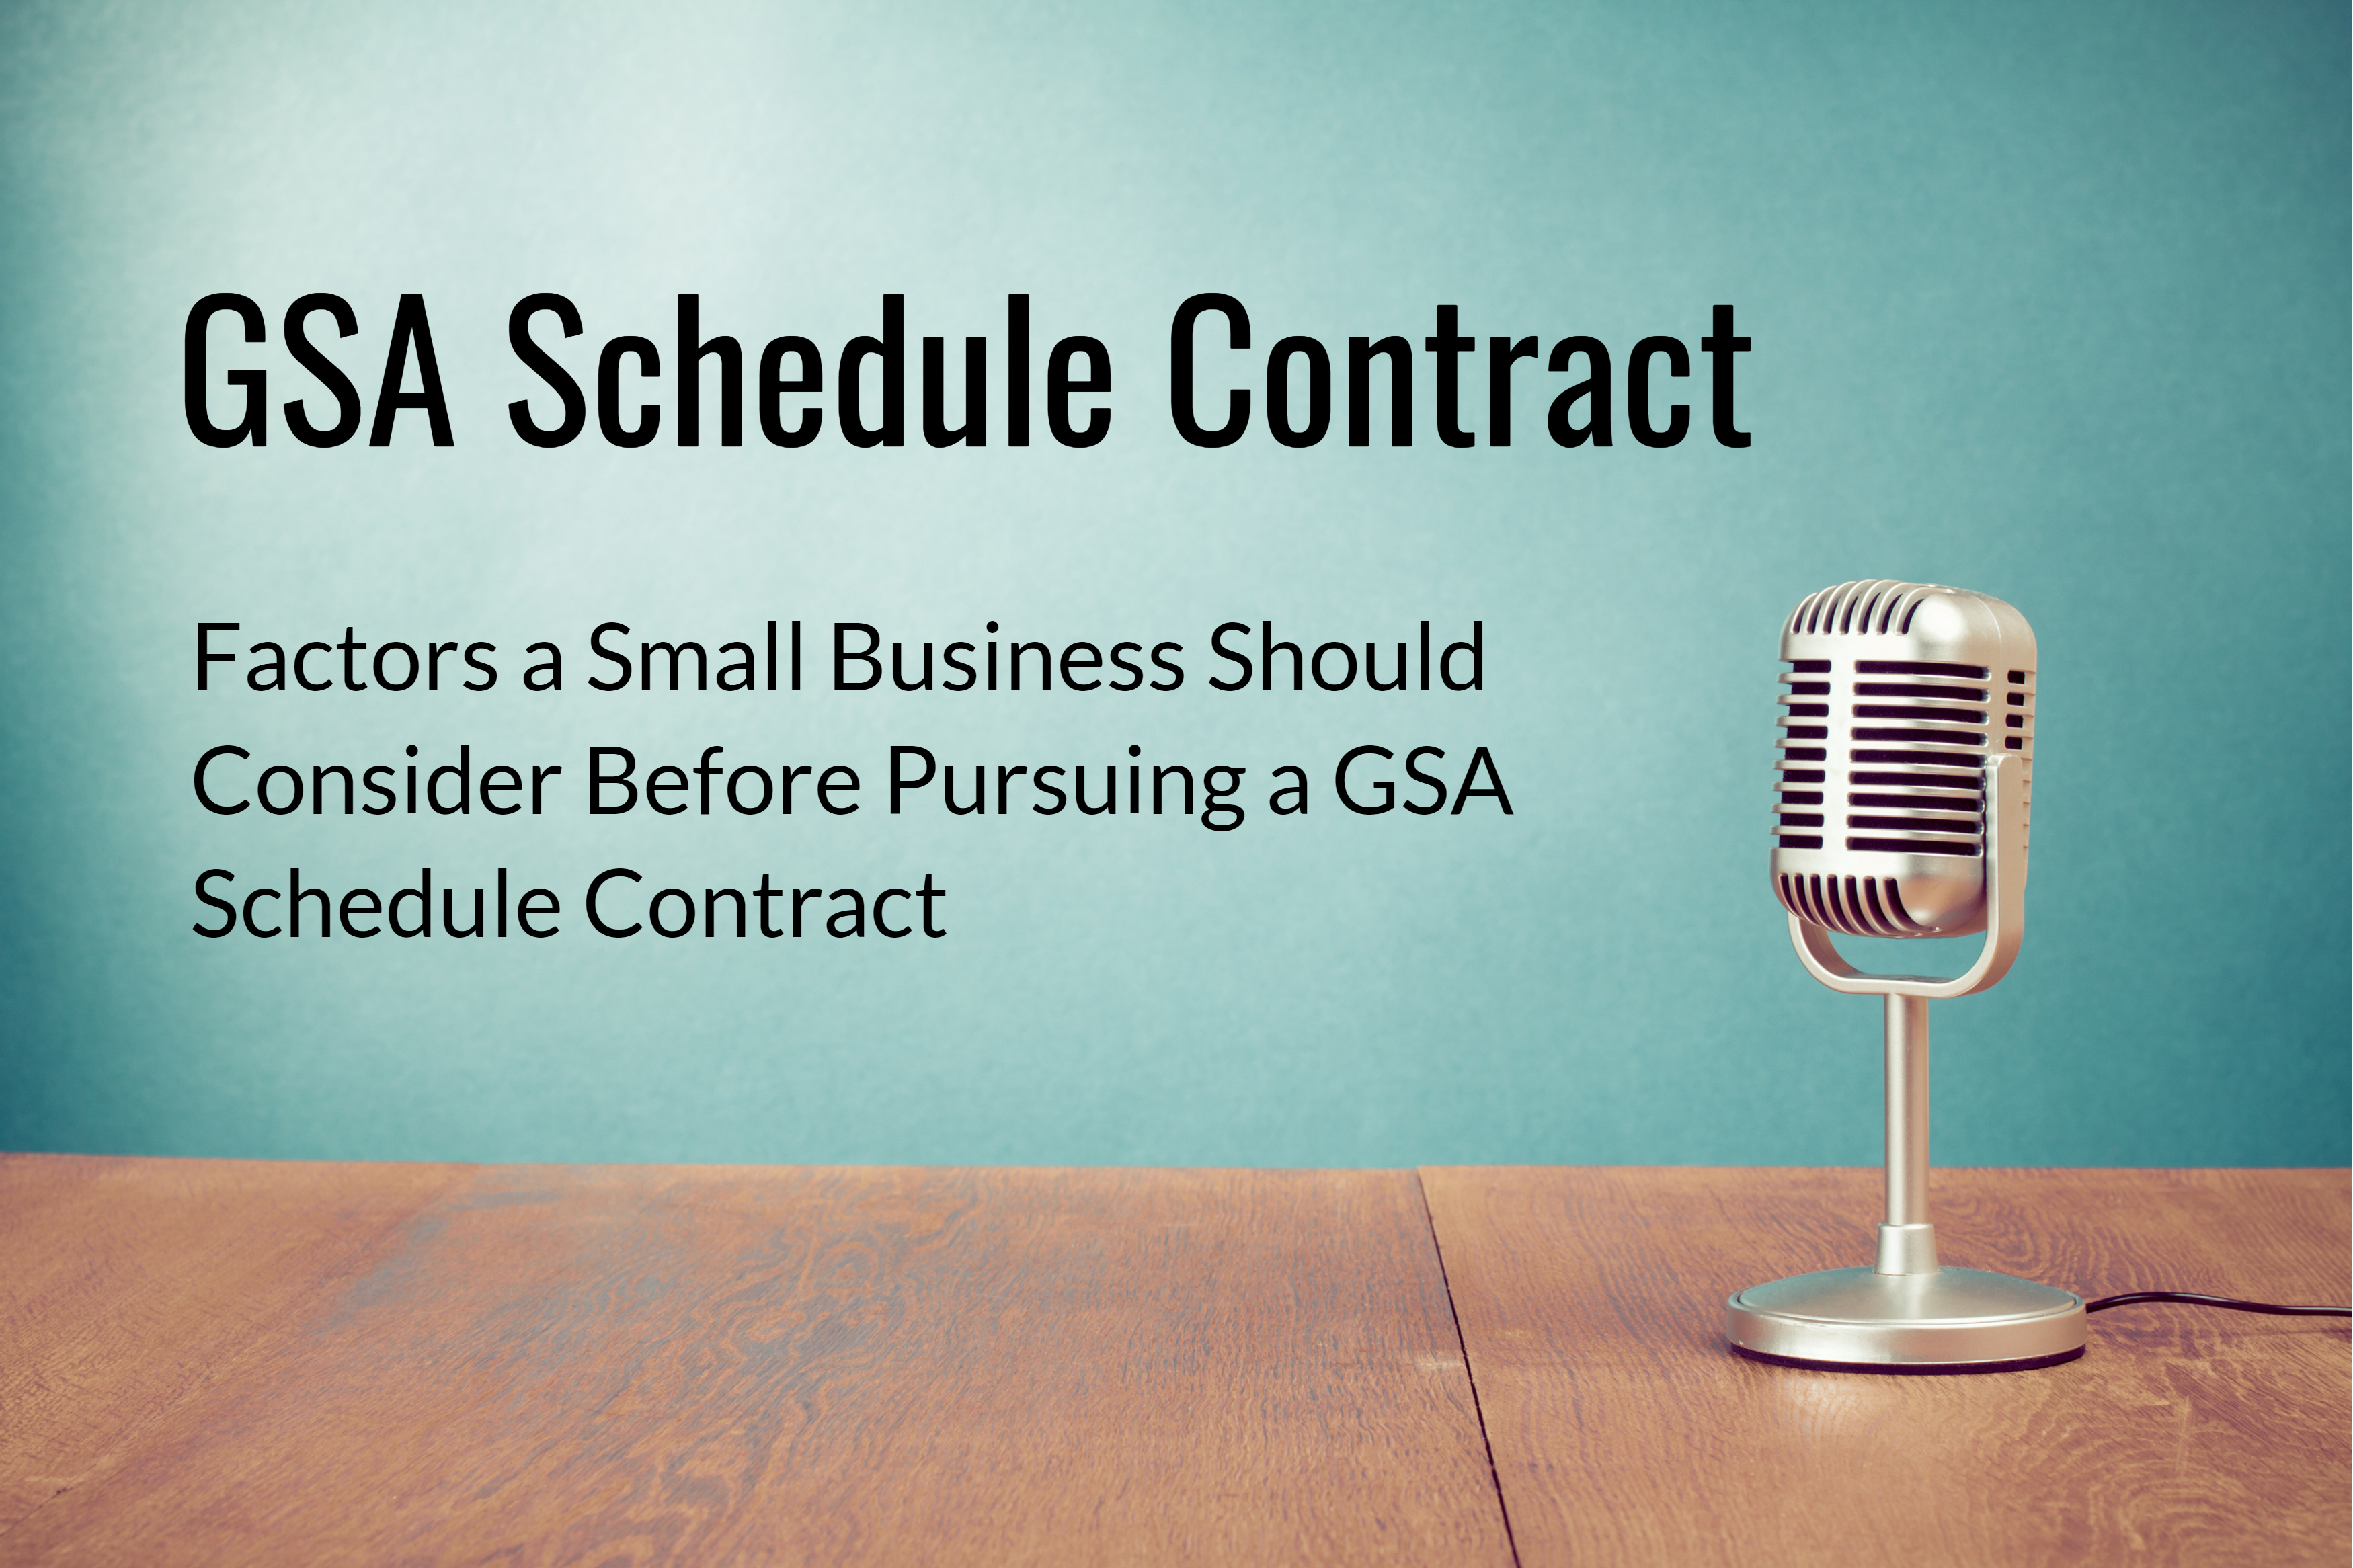 What Should a Small Business Consider Before Pursuing a GSA Schedule